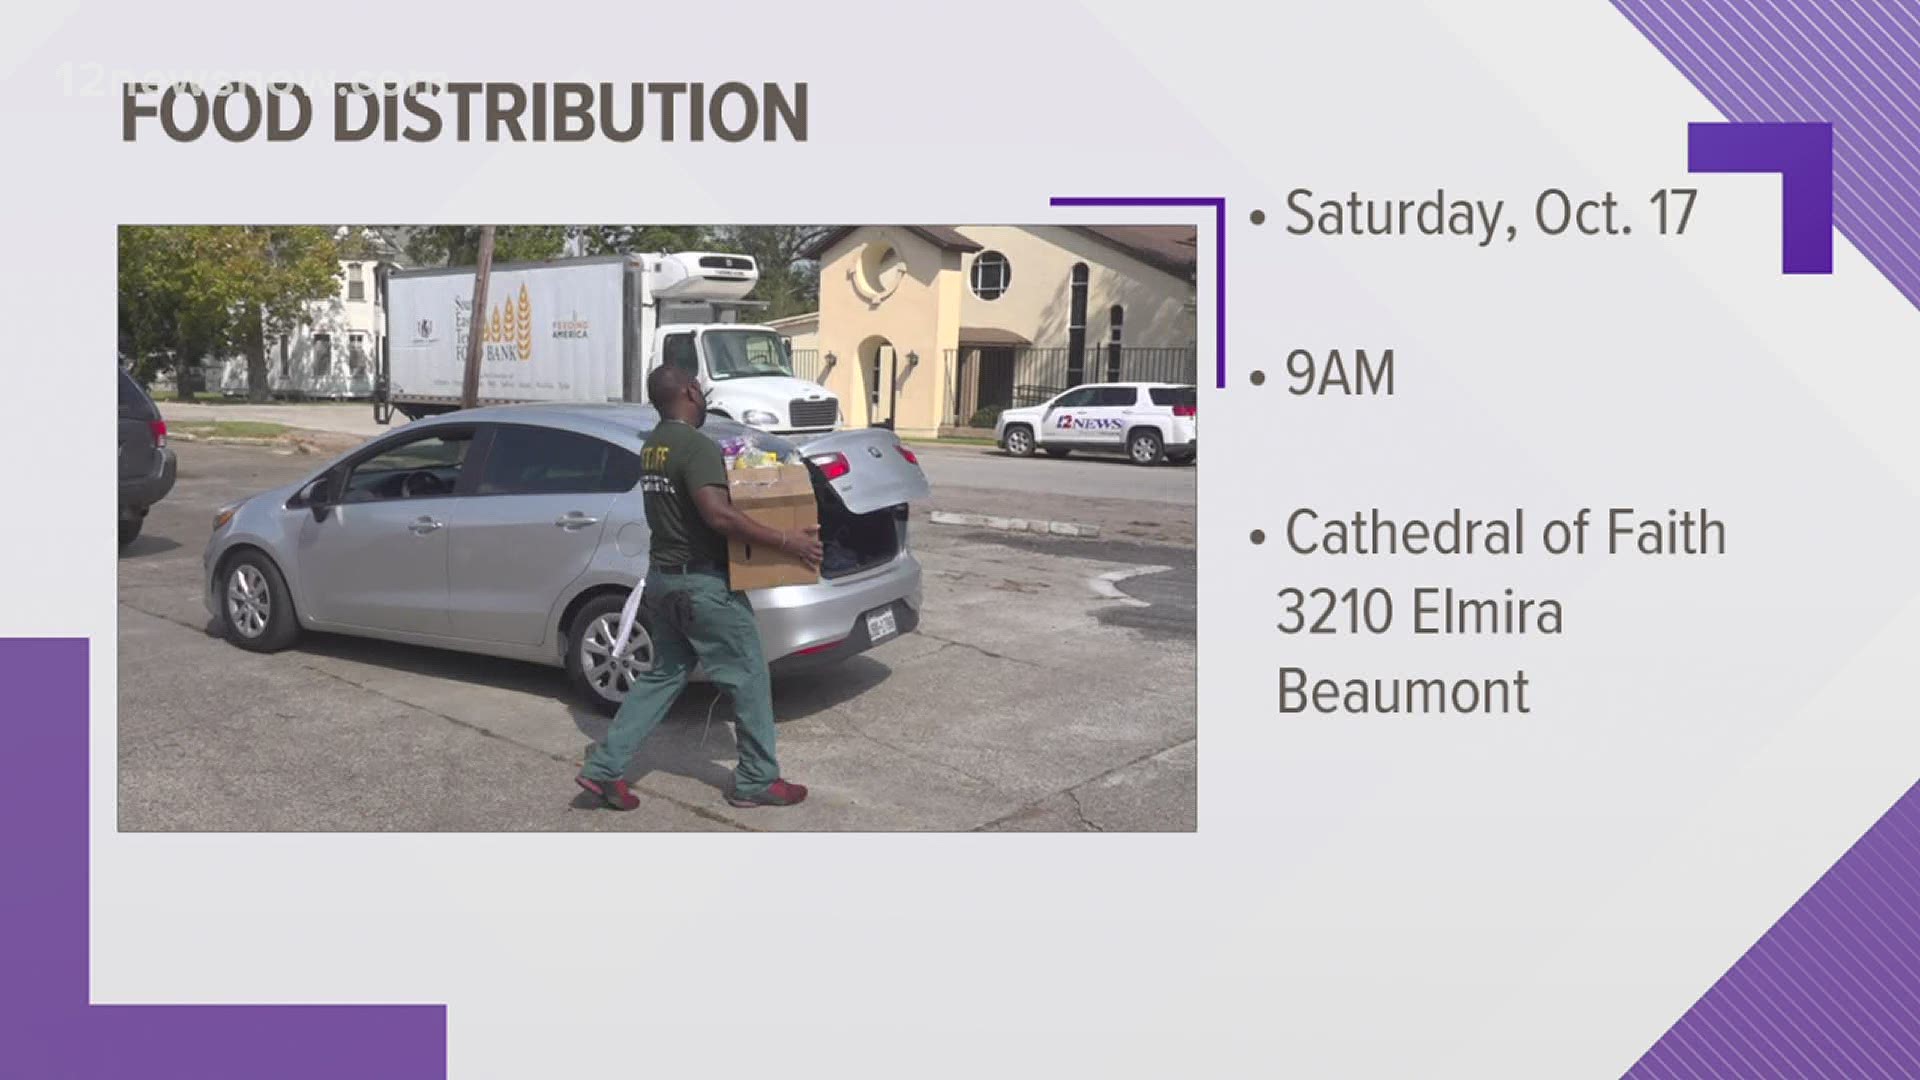 If you are still recovering from the storms and need assistance, the Southeast Texas Food Bank is holding a special disaster distribution Saturday.